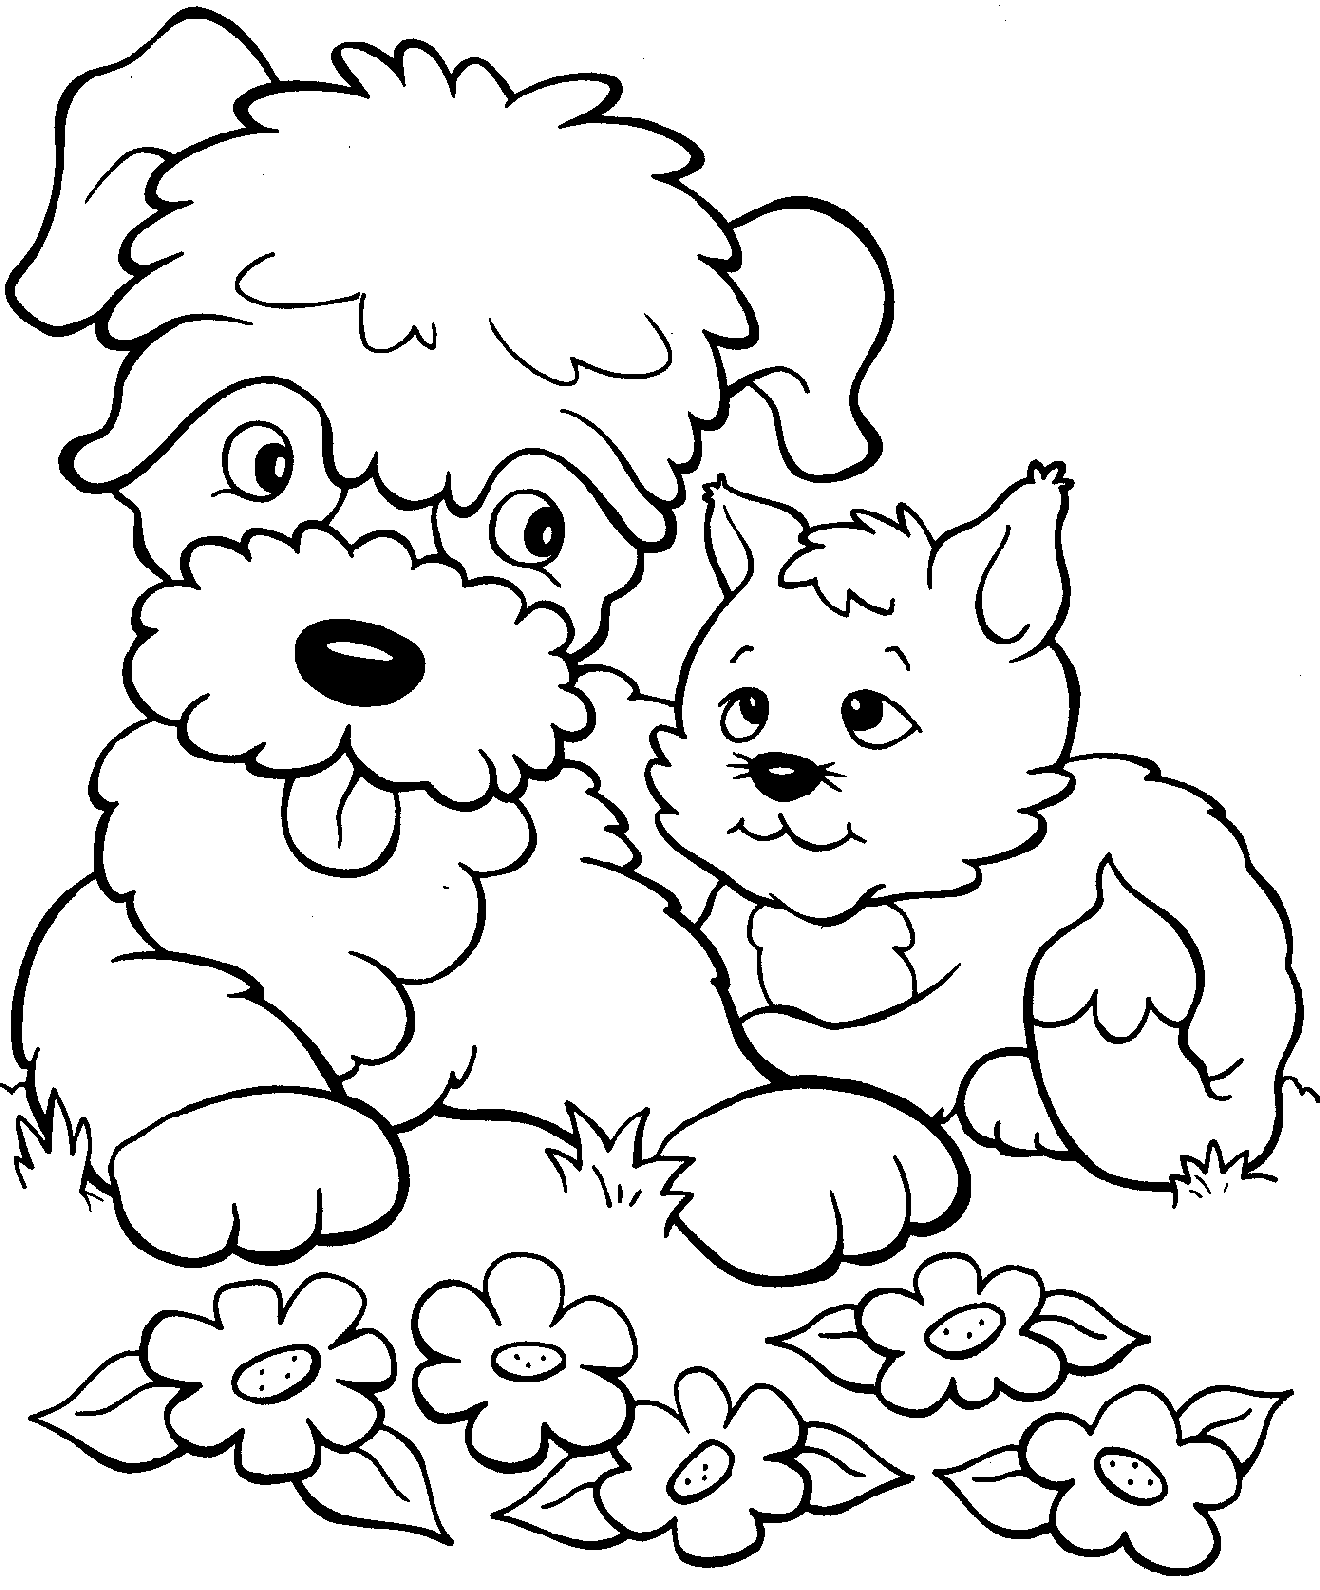 Free Printable Kitten Coloring Pages - Printable World Holiday